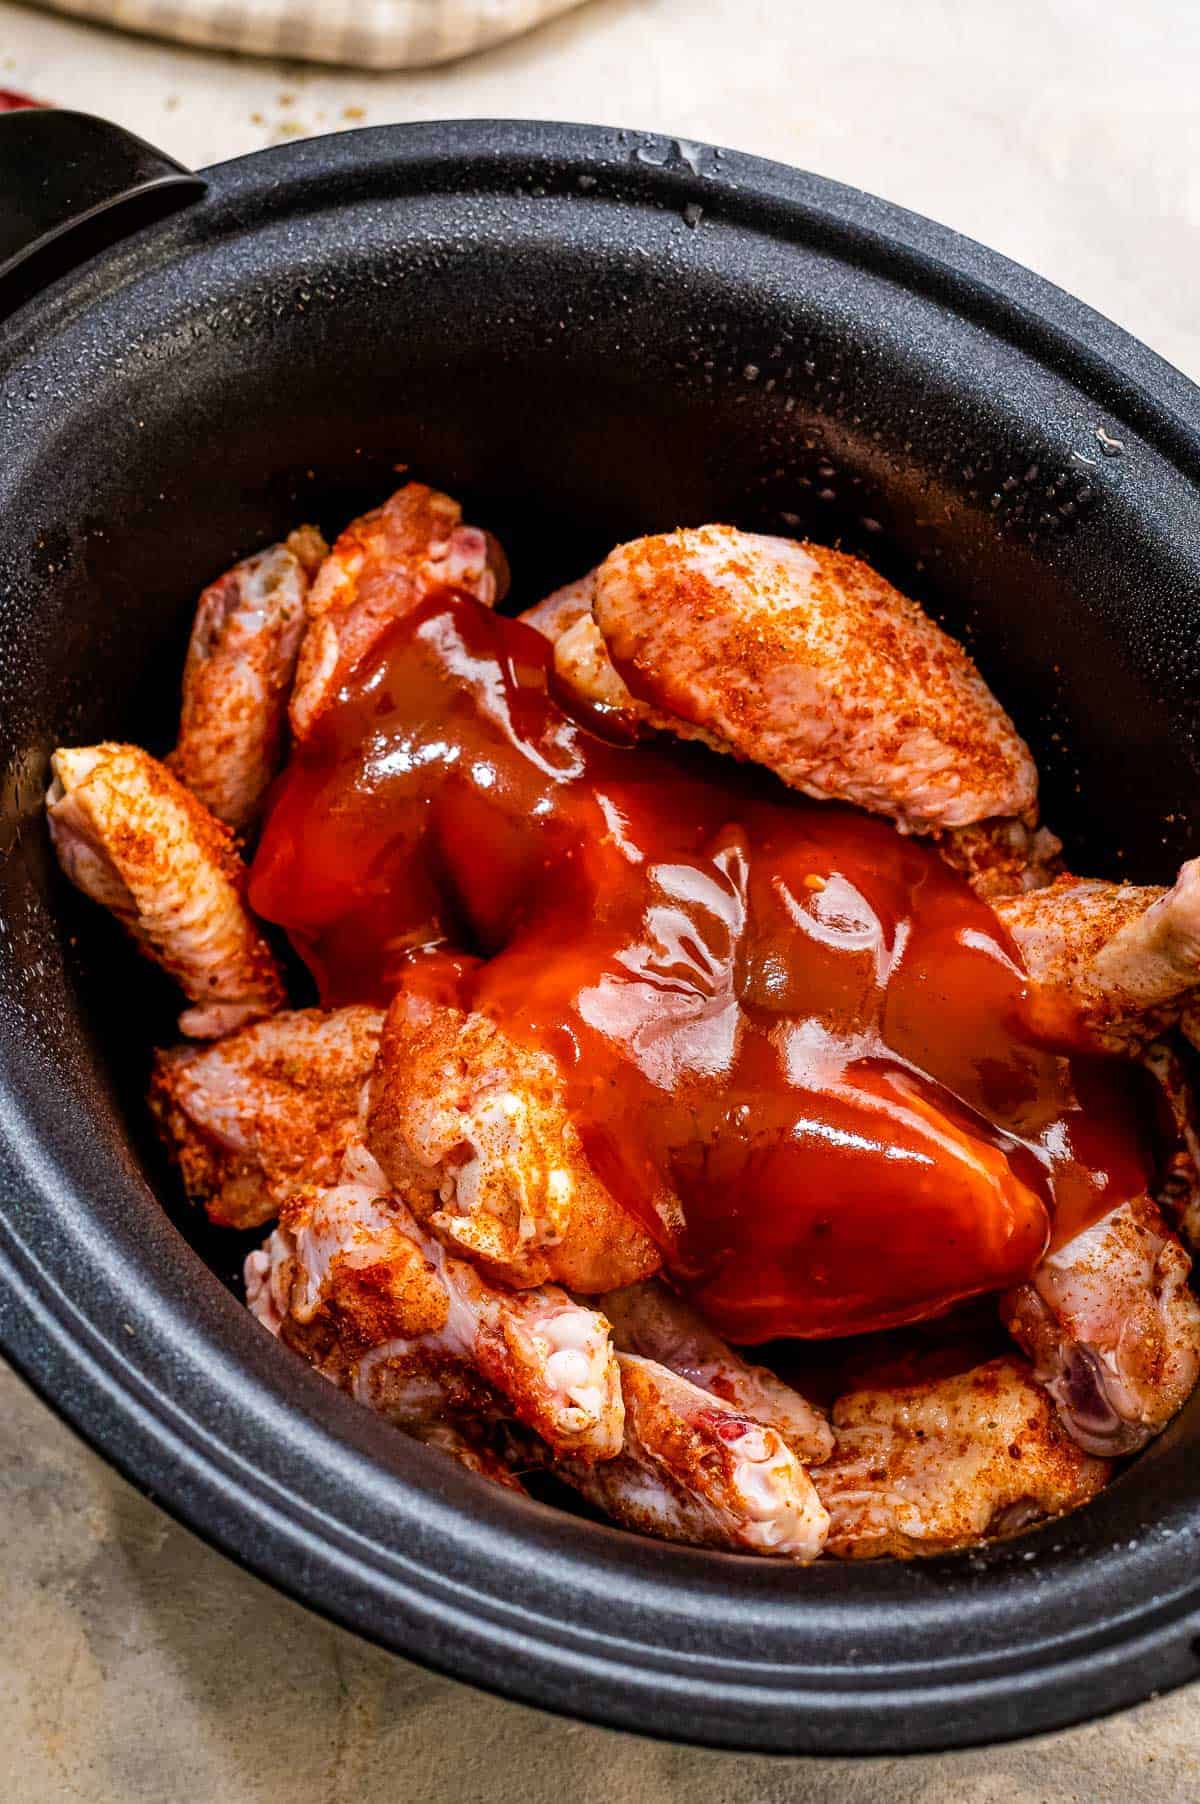 Crock pot with seasoned chicken wings and BBQ sauce